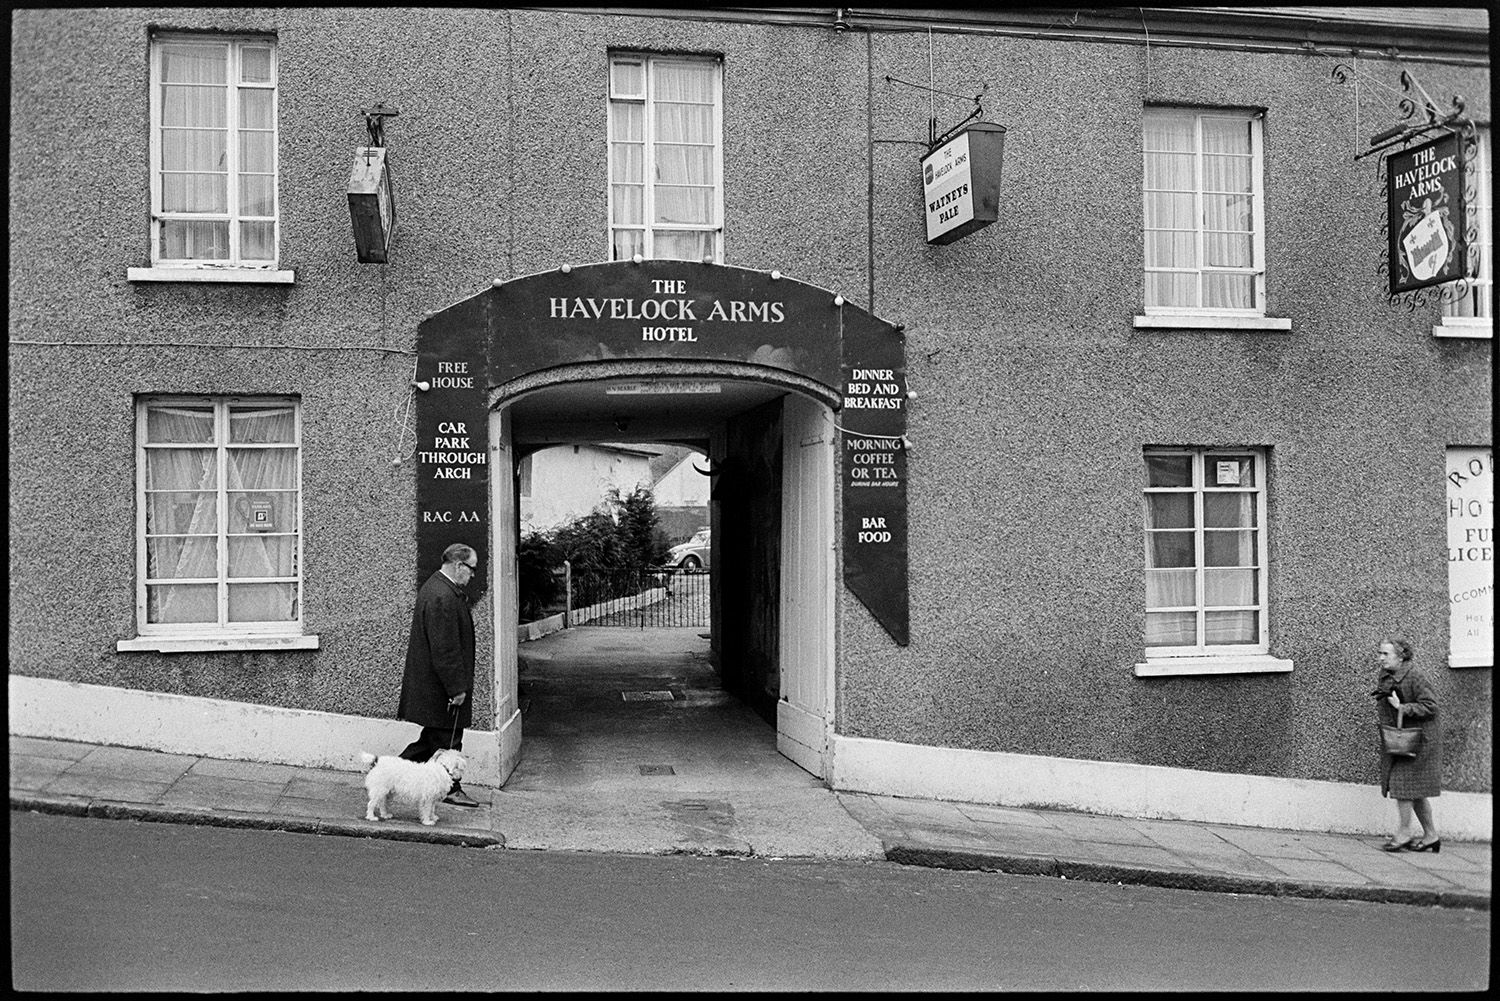 Front of pub, unusual sign. 
[The arched entrance to the Havelock Arms Hotel in Market Street, Hatherleigh. People are walking past the entrance, including a man walking a dog.]